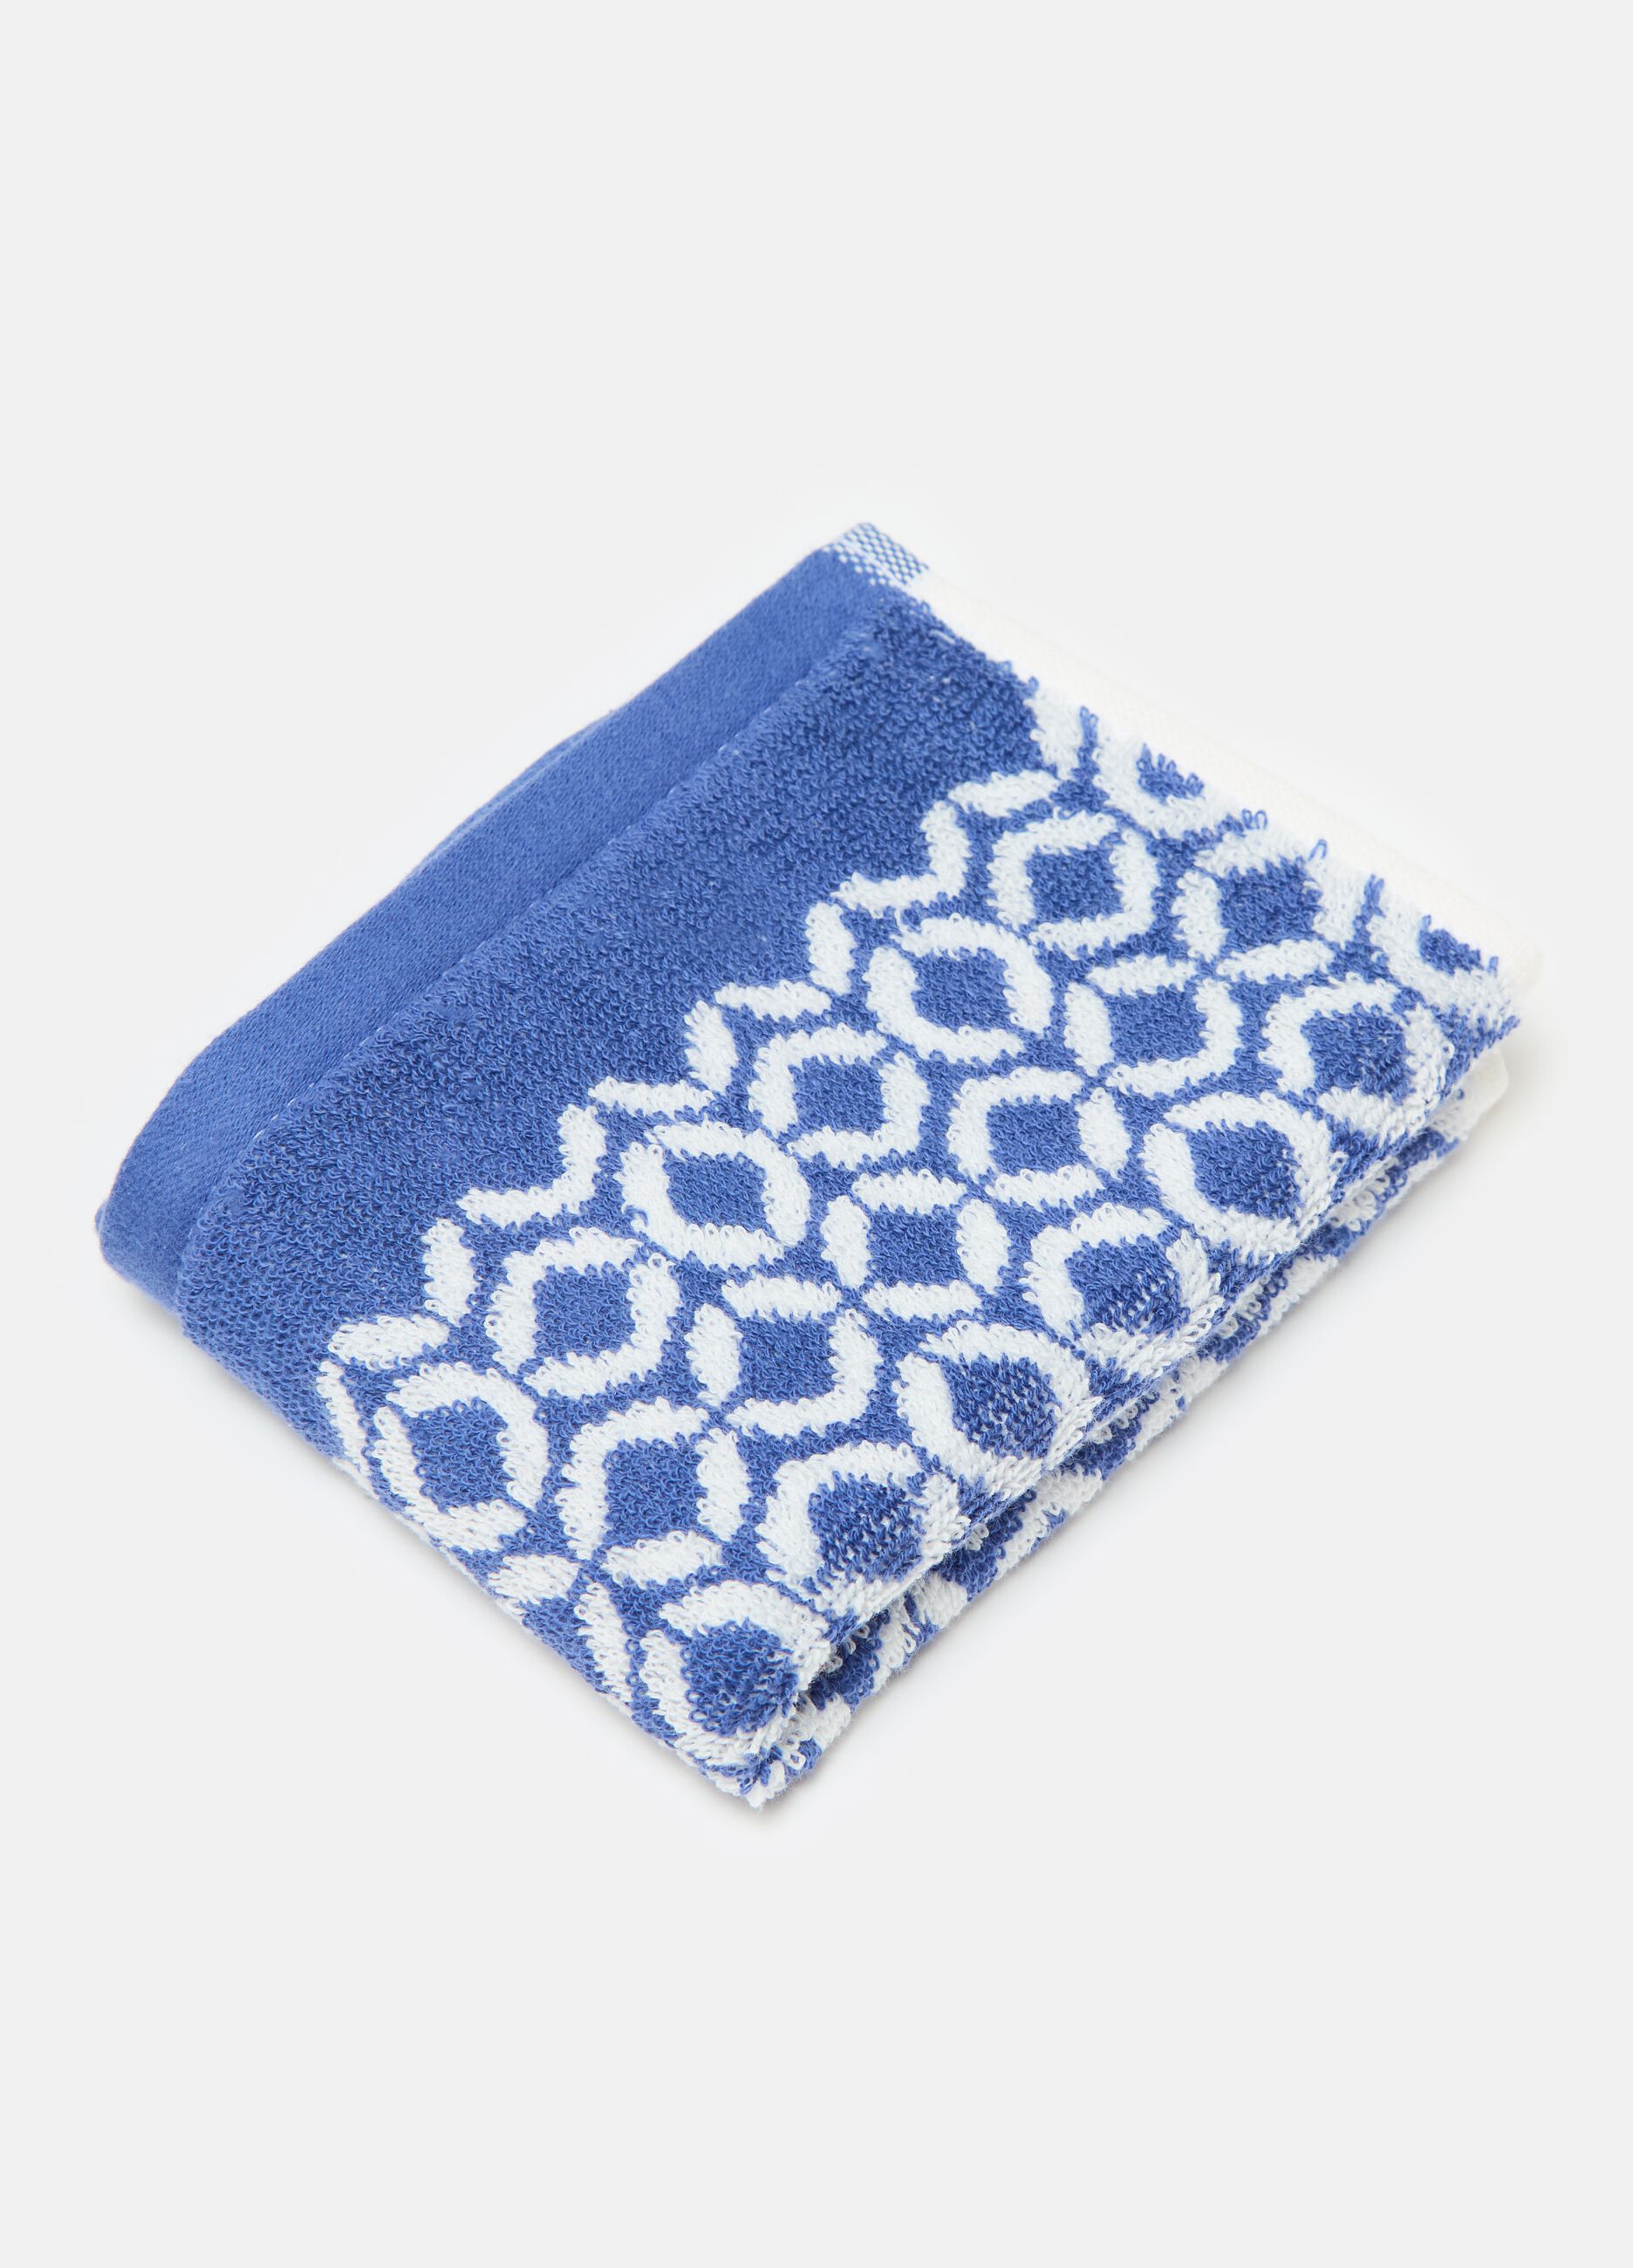 Guest towel with dots pattern